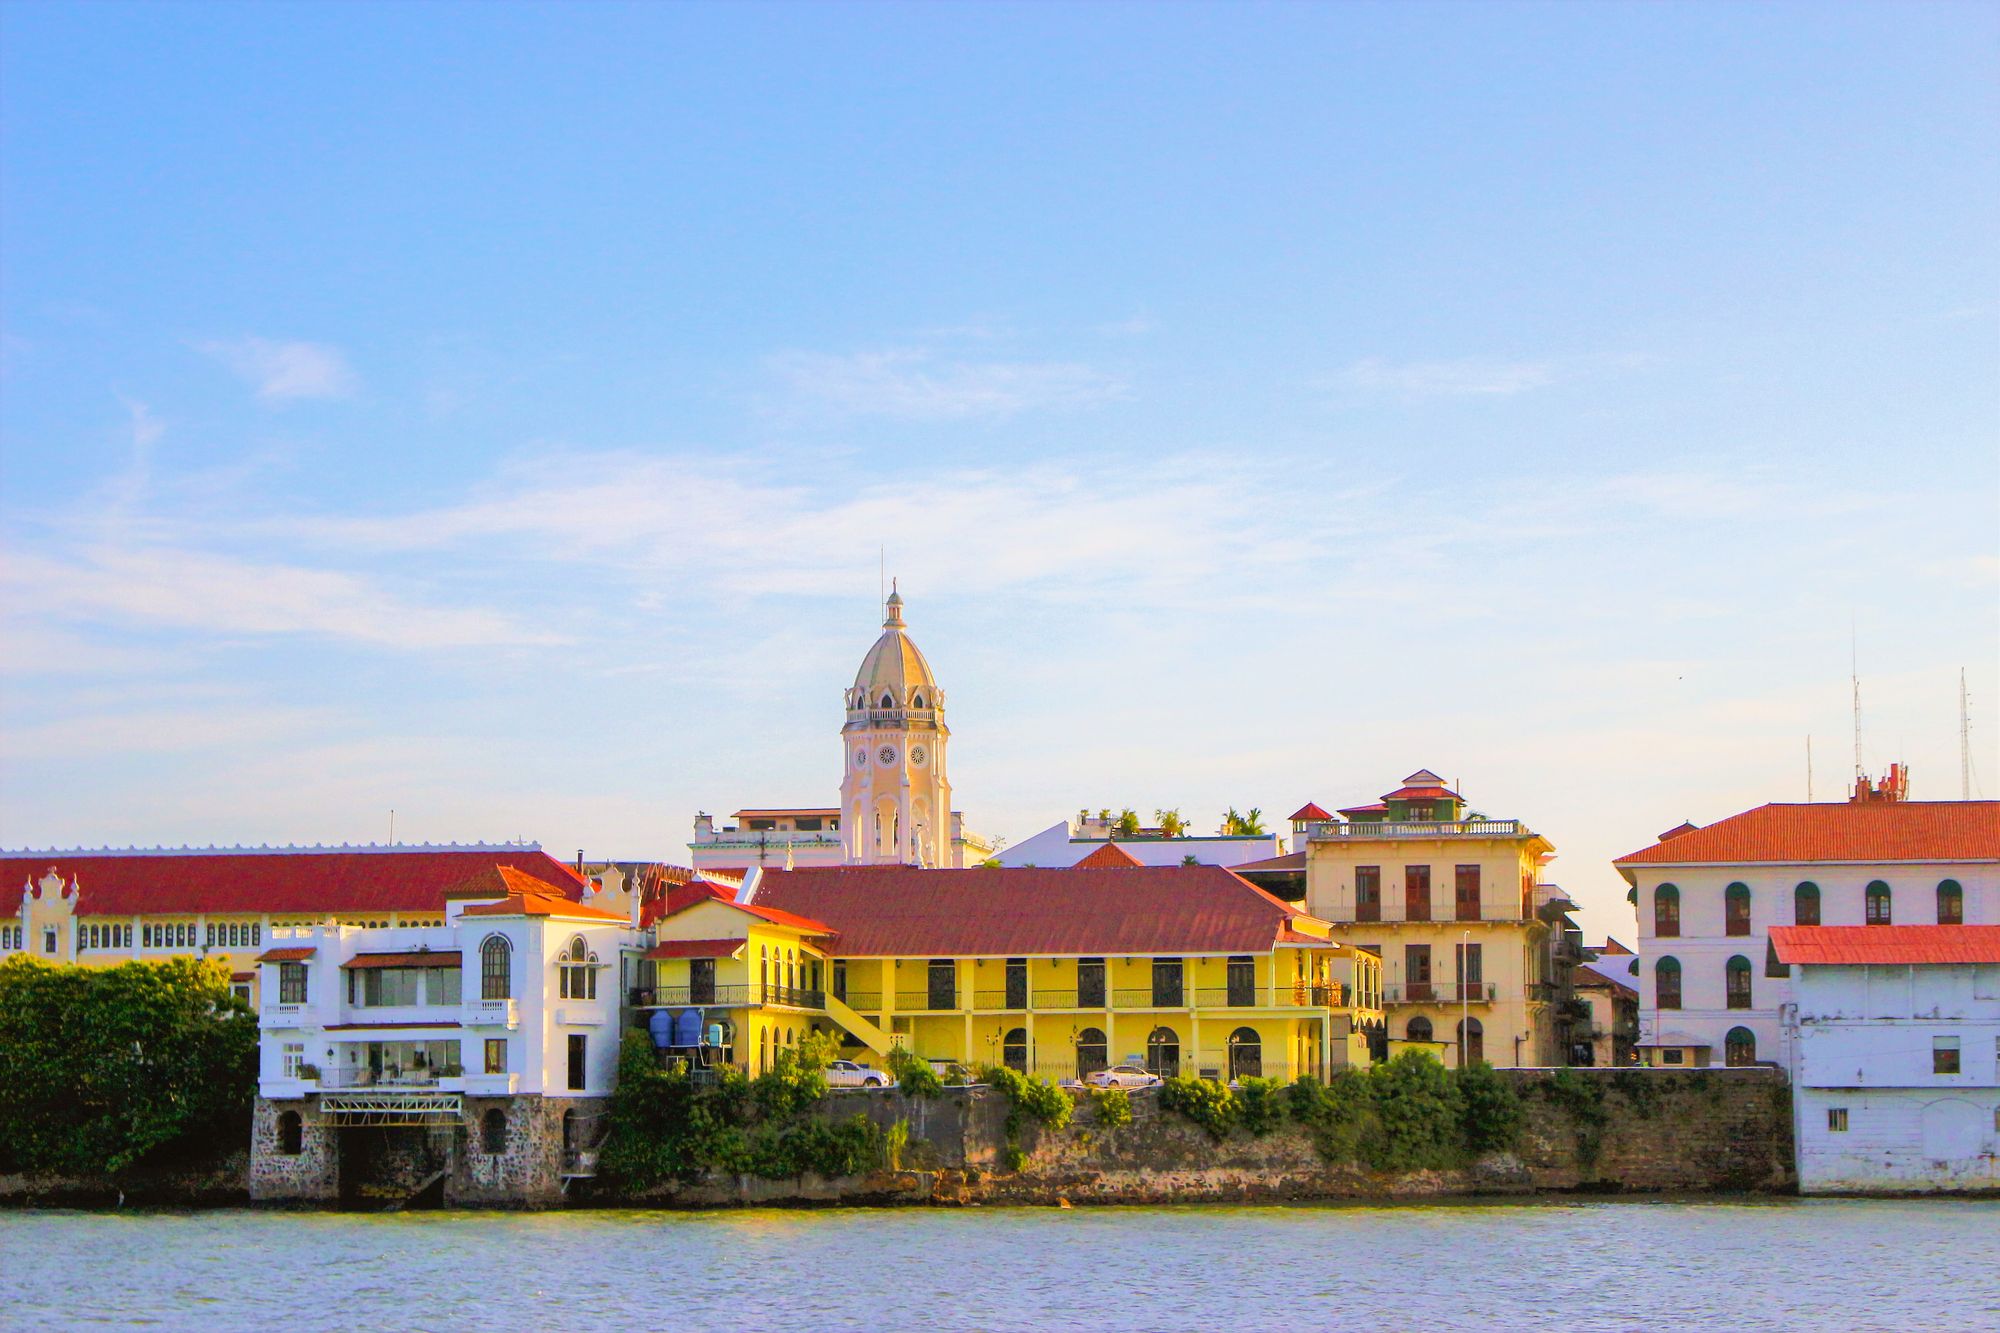 The old town of Casco Viejo in Panama City